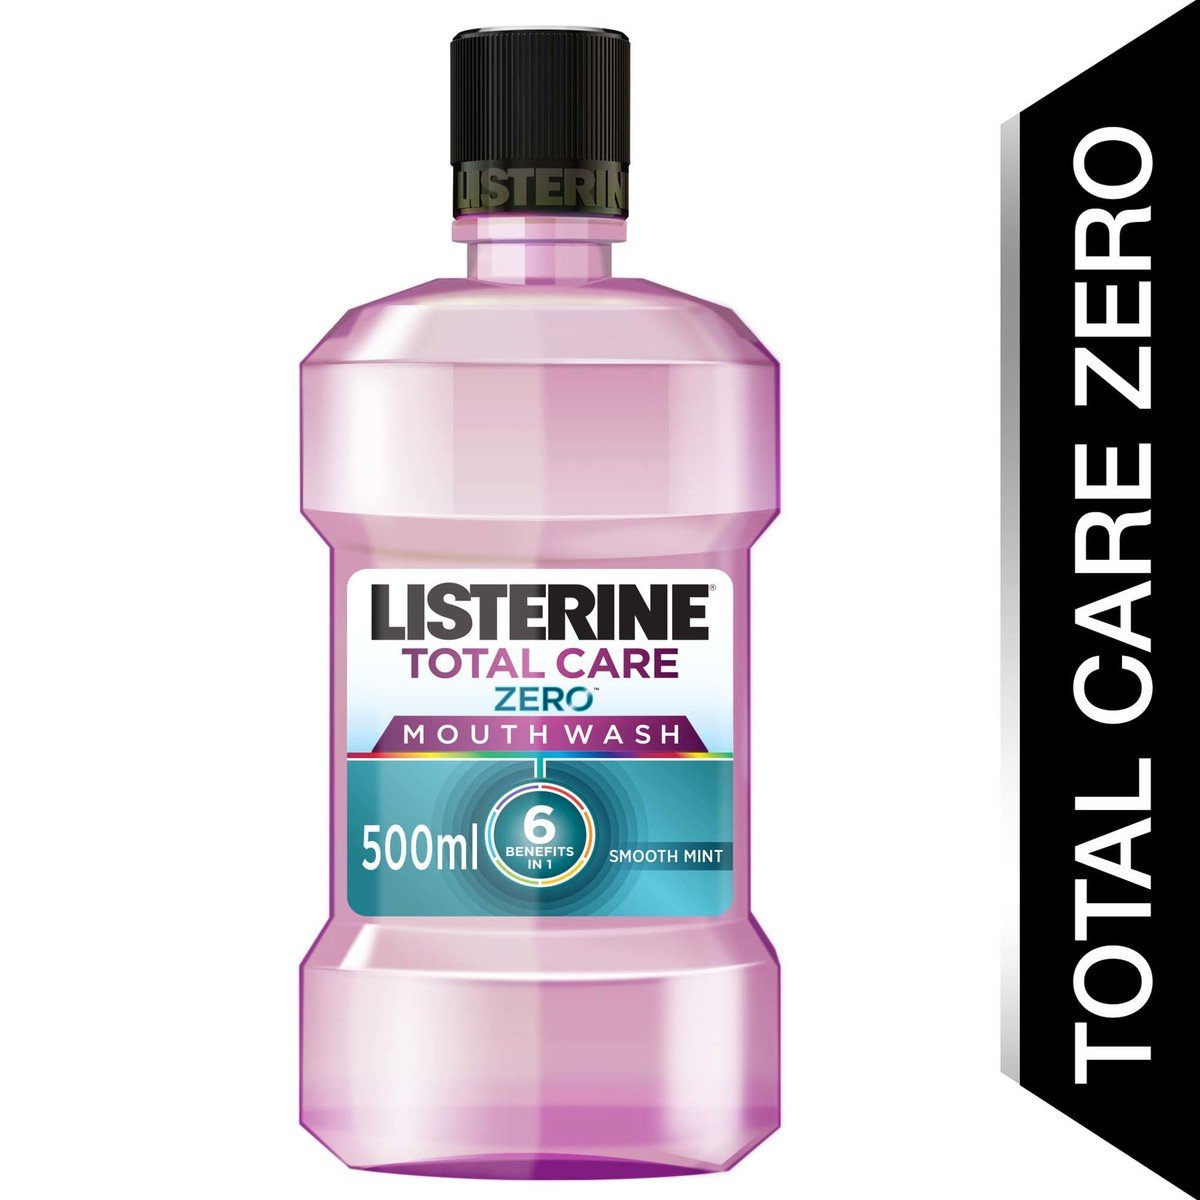 Listerine Mouthwash Total Care Zero Alcohol Smooth Mint 500ml